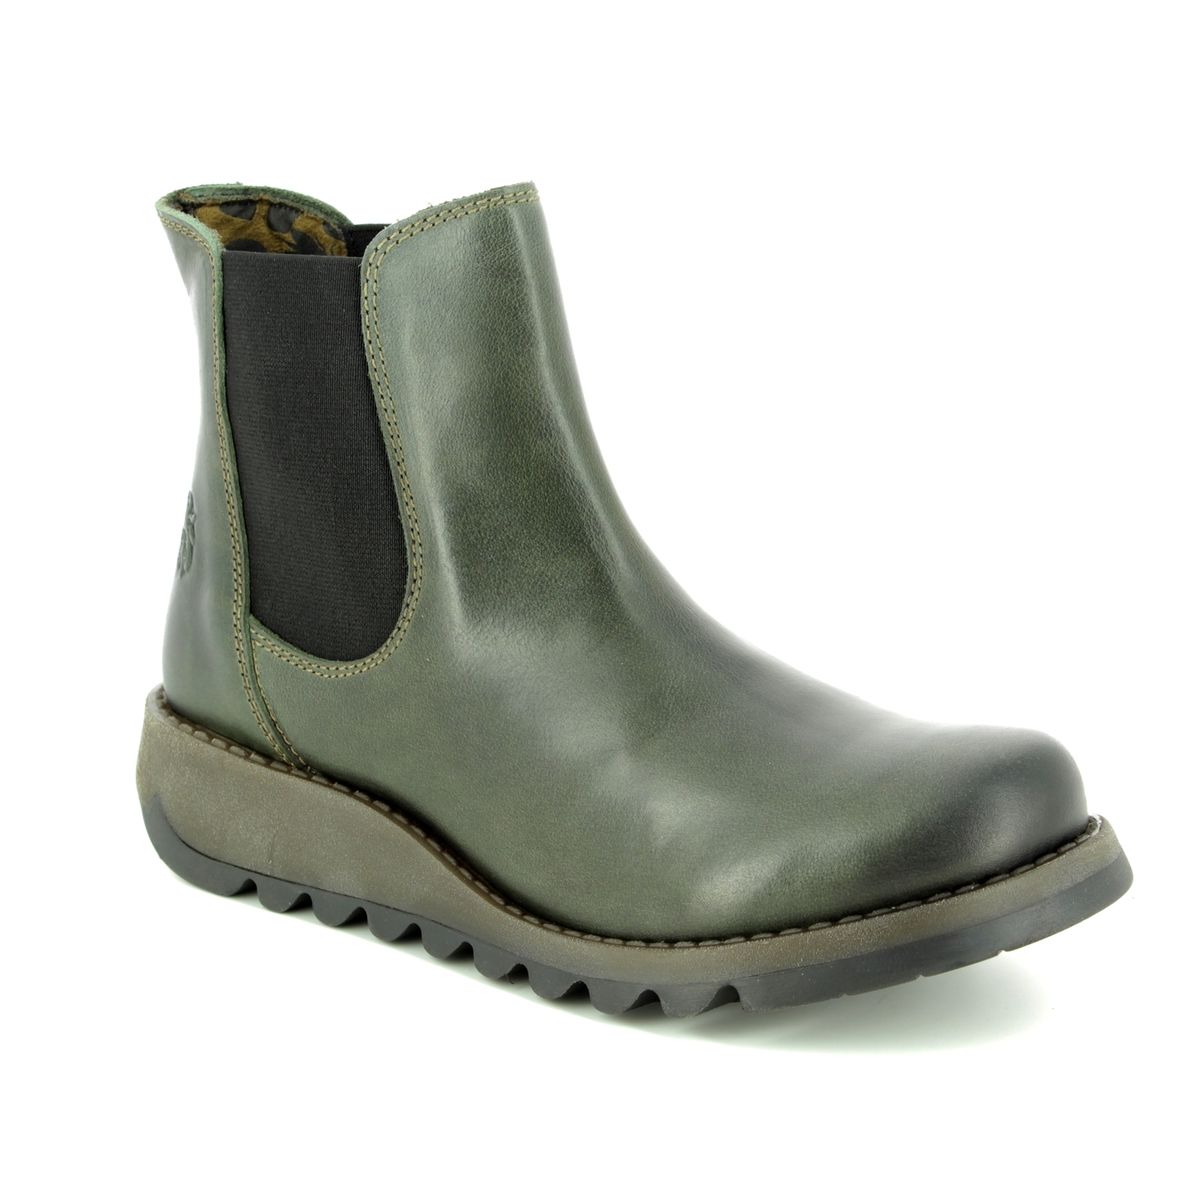 Fly London Salv Diesel Leather Womens Ankle Boots P143195 In Size 41 In Plain Diesel Leather